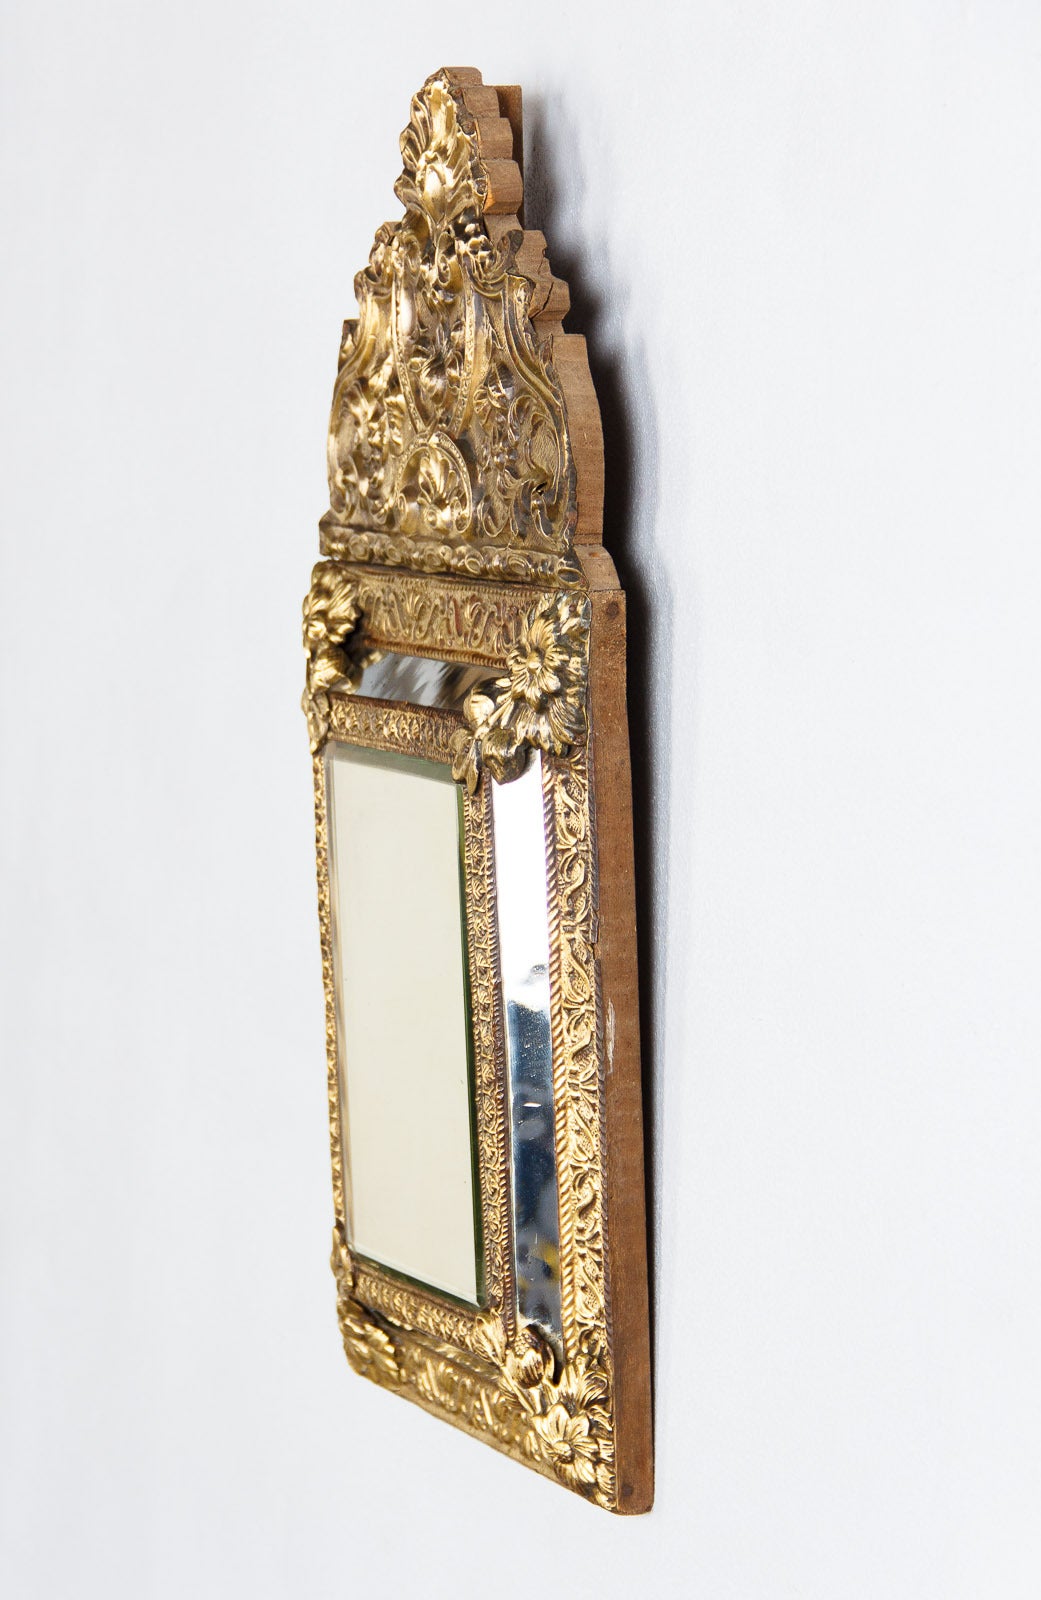 A small size Napoleon III period repousse mirror in gilded tin on a wooden back. The crest features a shell motif and the rest of the frame adorned with floral and foliate ornamentation. The mirrored glass is beveled. Size of glass is 12